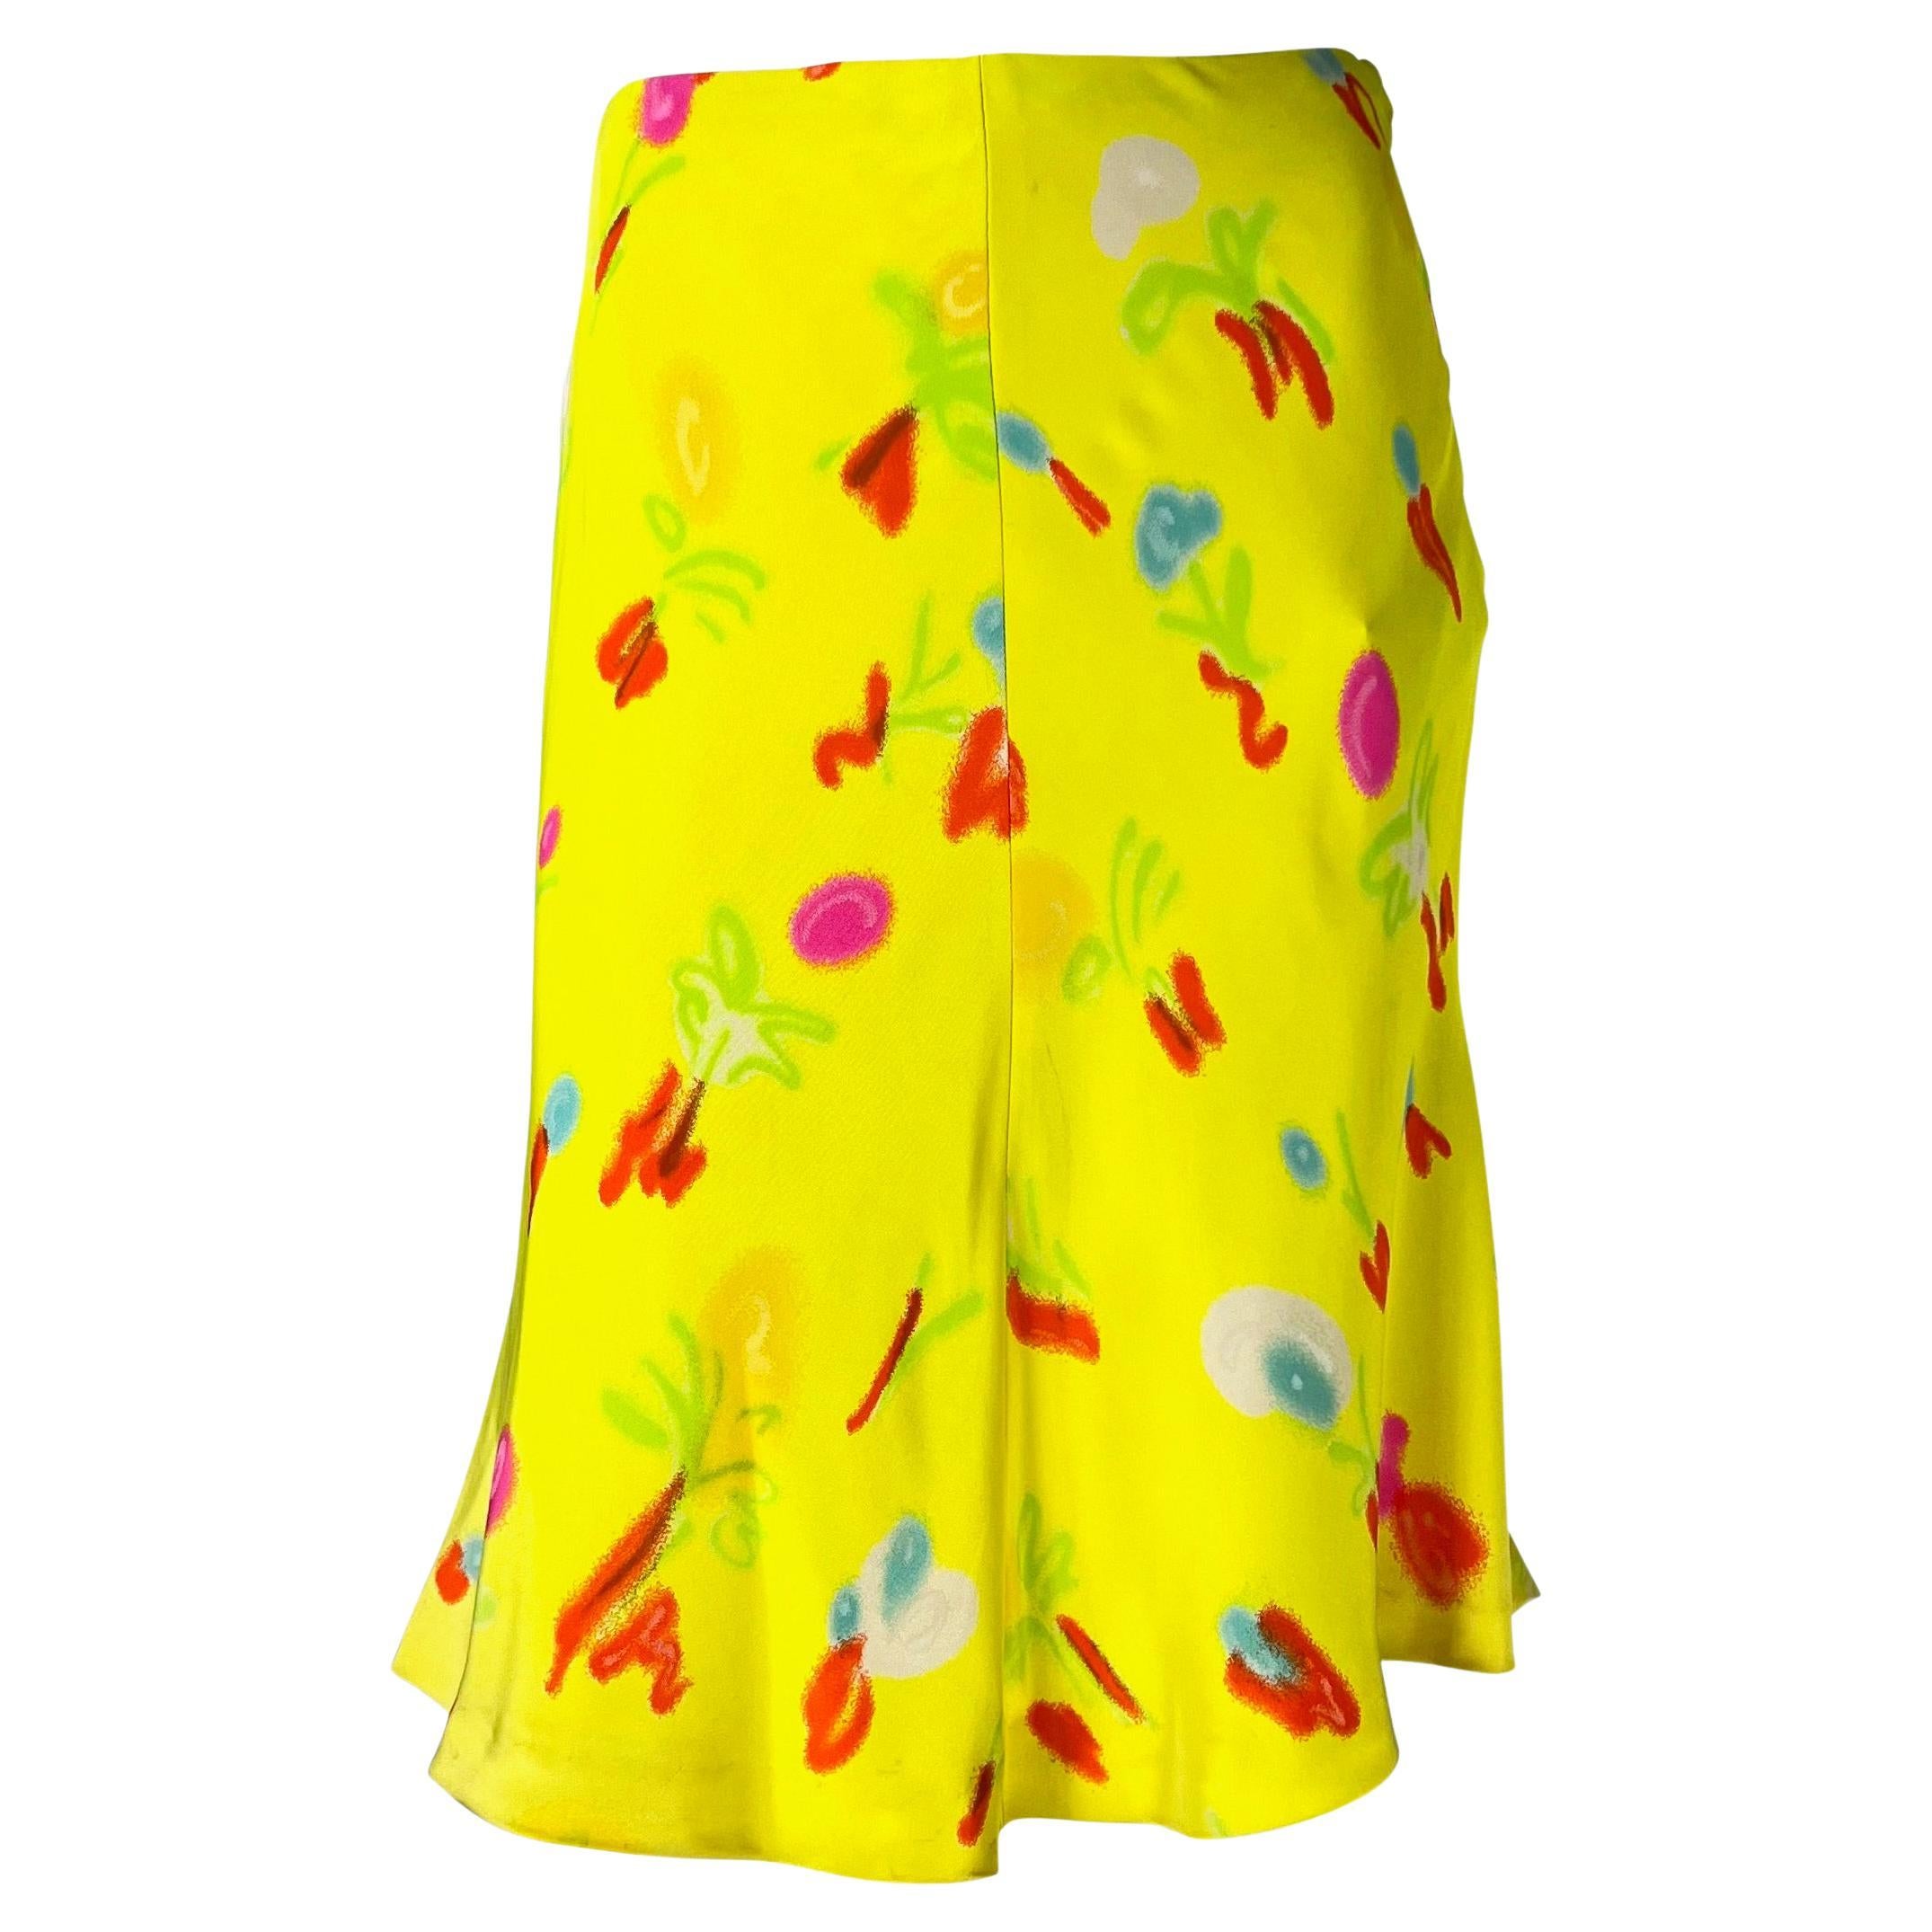 NWT S/S 1996 Gianni Versace Couture Neon Yellow Graffiti Floral Print Skirt